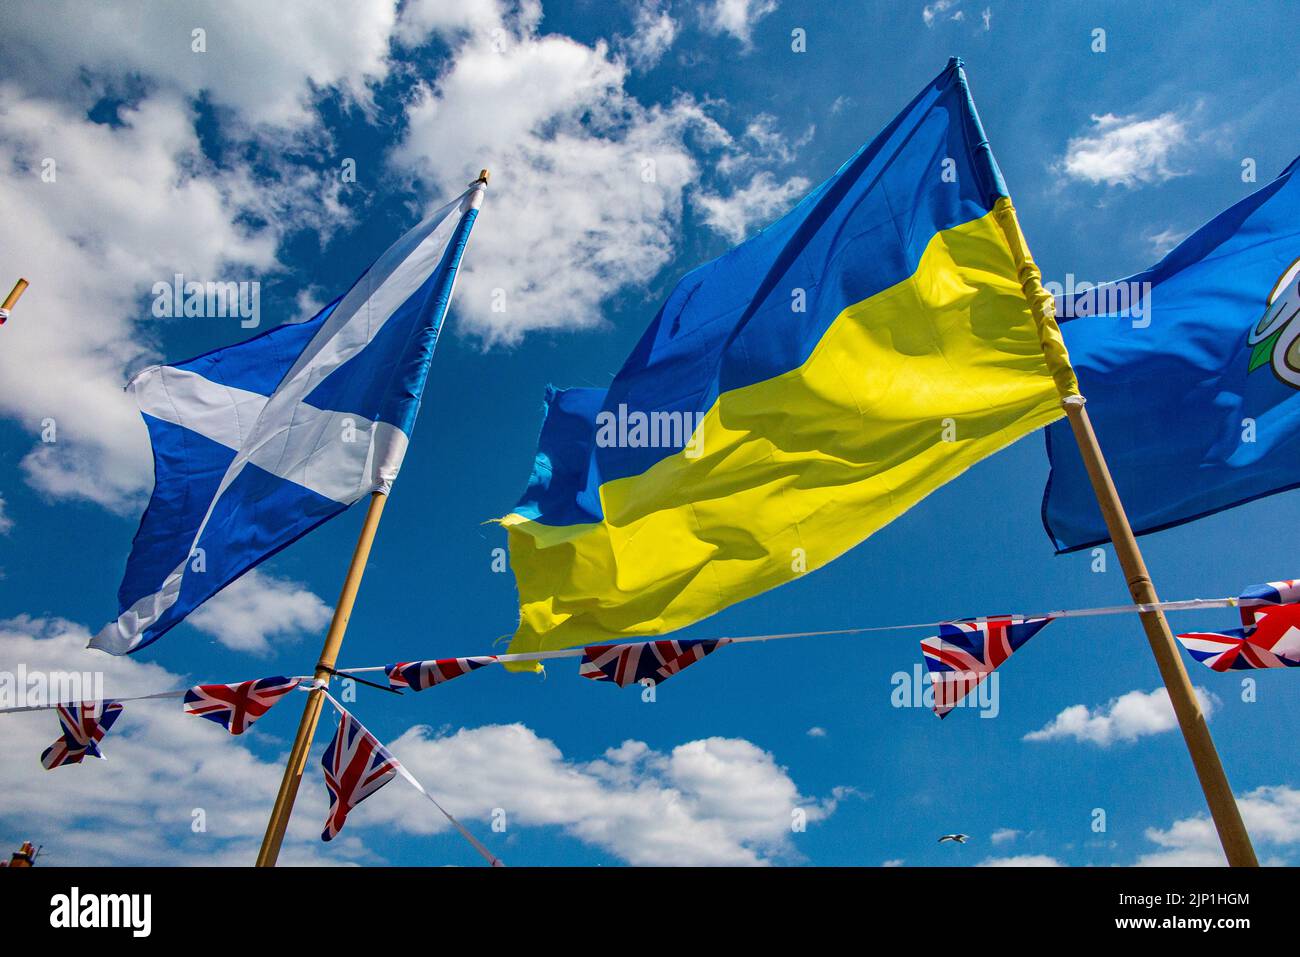 The Scottish and Ukranian flags flutter on a summers day in England Stock Photo